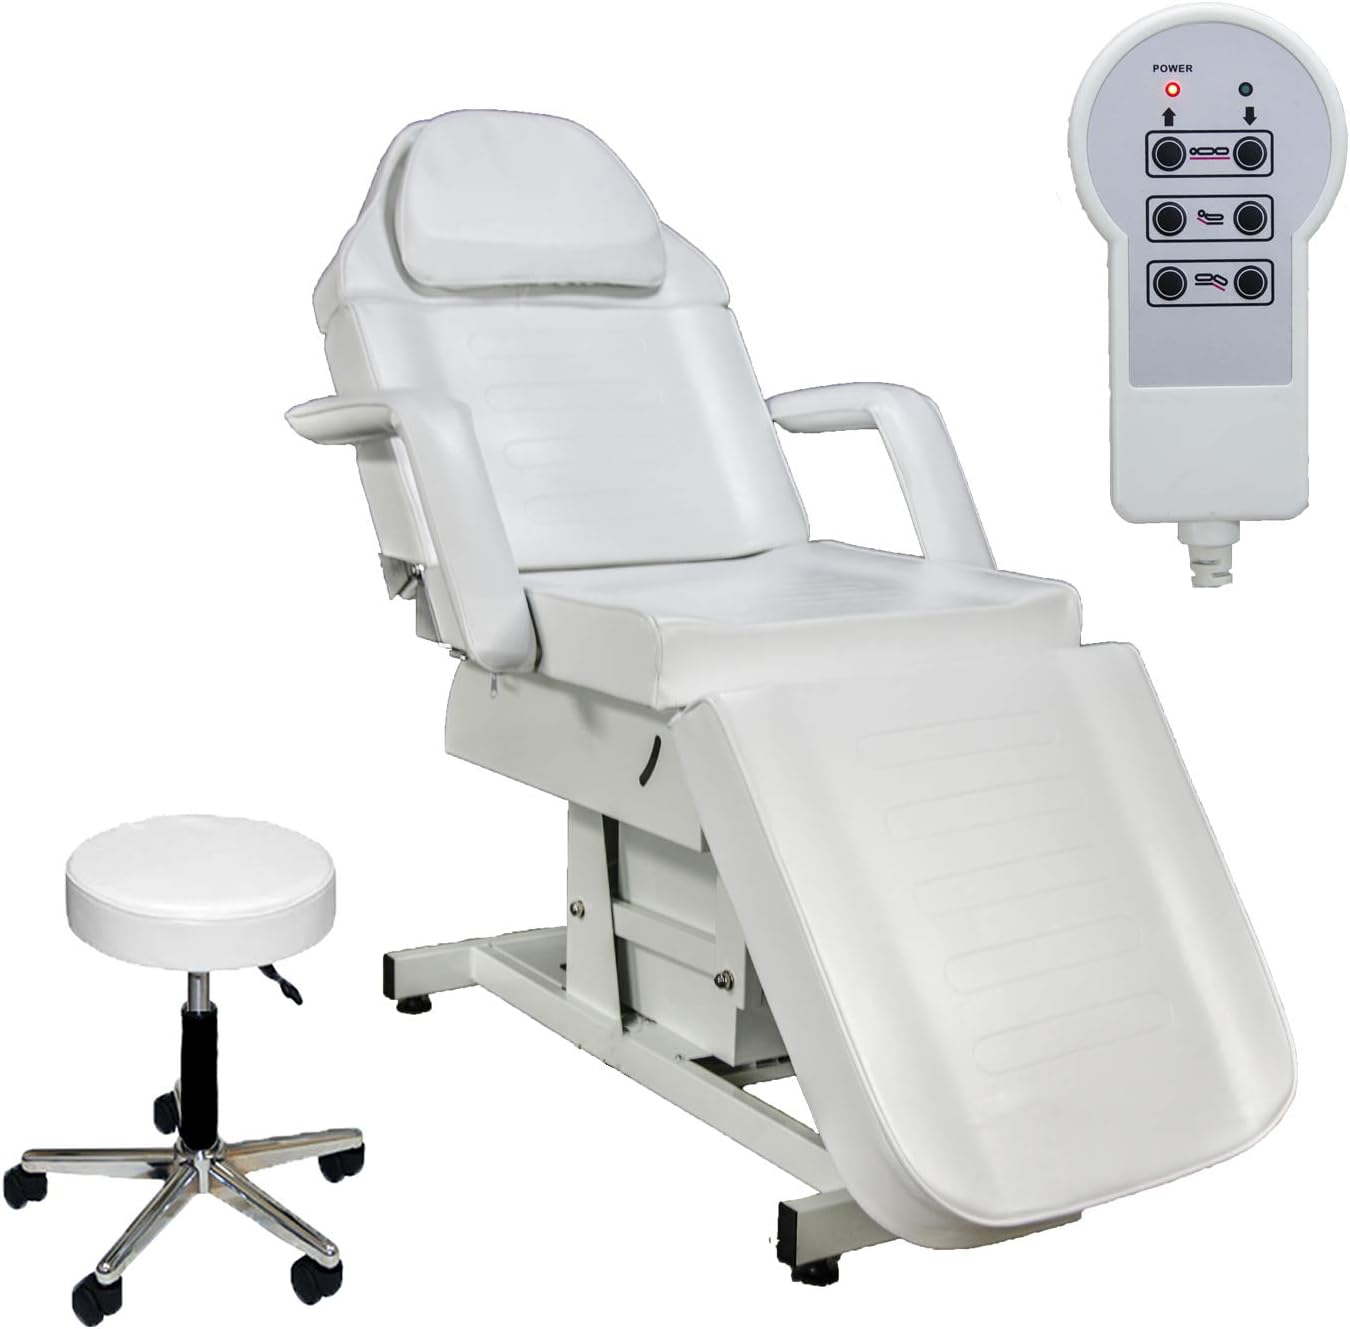 LCL Beauty Fully Electric Adjustable Facial Bed Massage Table